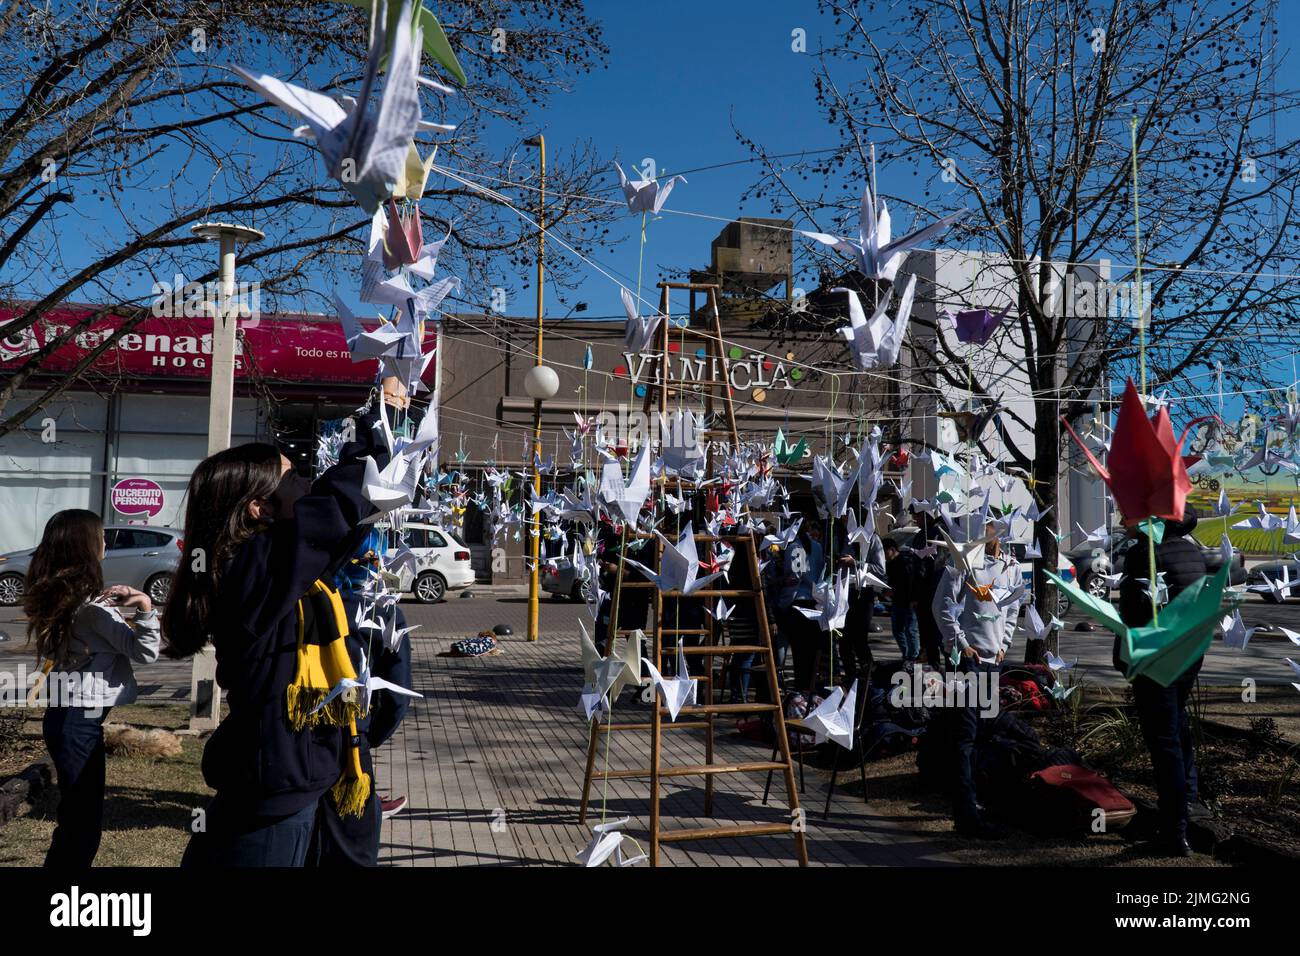 High school students of Firmat, hang a thousand origami cranes during 'A Day for Peace' event marking the 77th anniversary of the atomic bombing of Hiroshima by the USA. Stock Photo